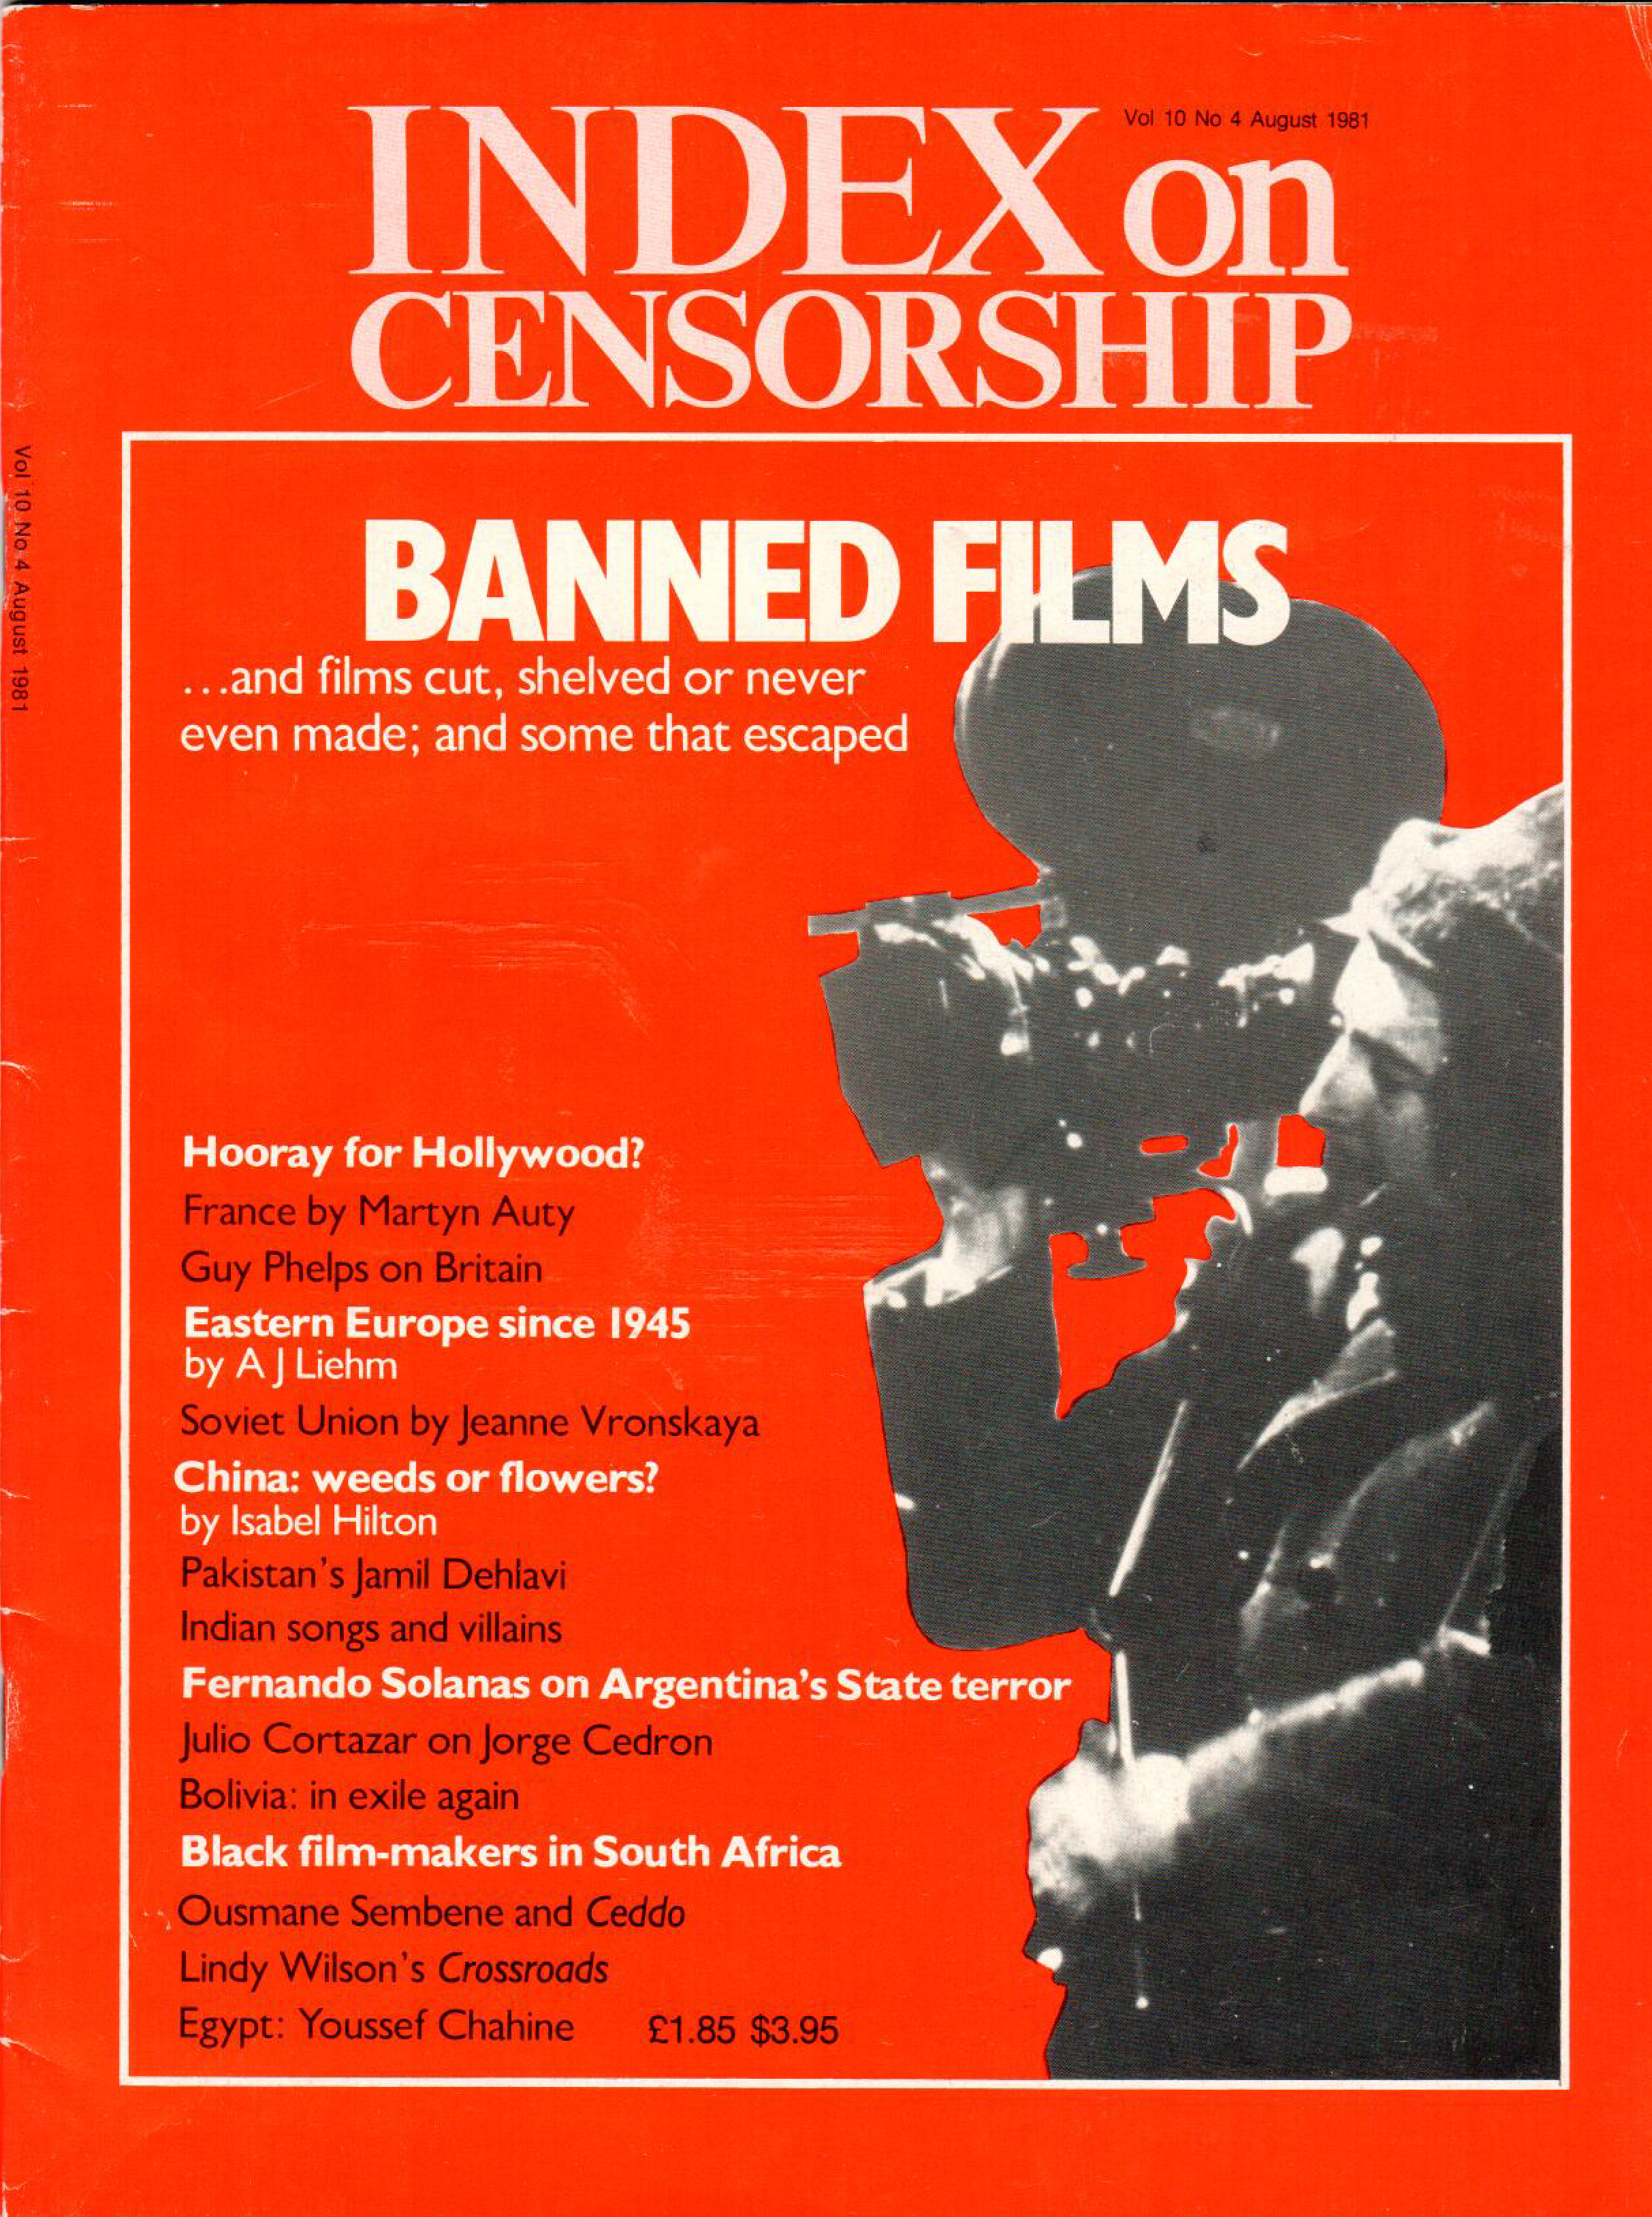 Banned films, the August 1981 issue of Index on Censorship